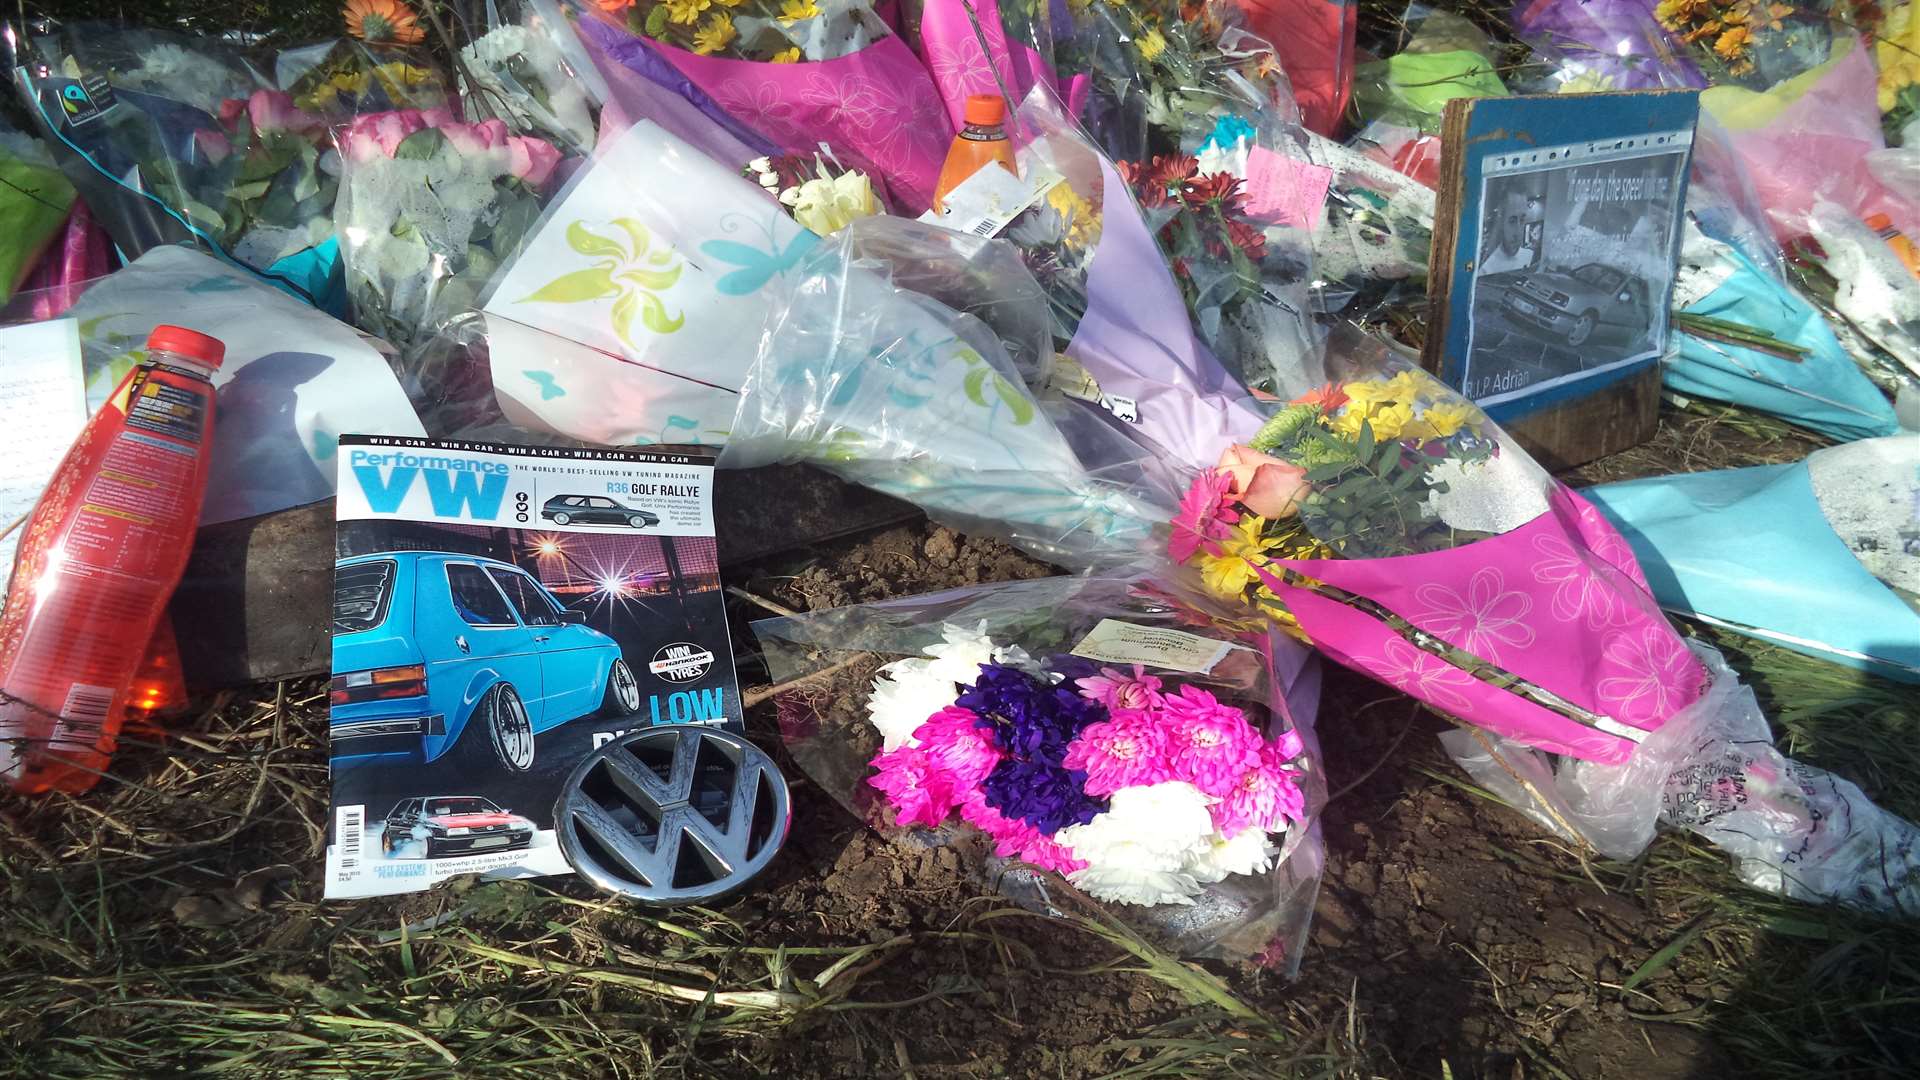 Flowers and messages have been left at the scene of the crash